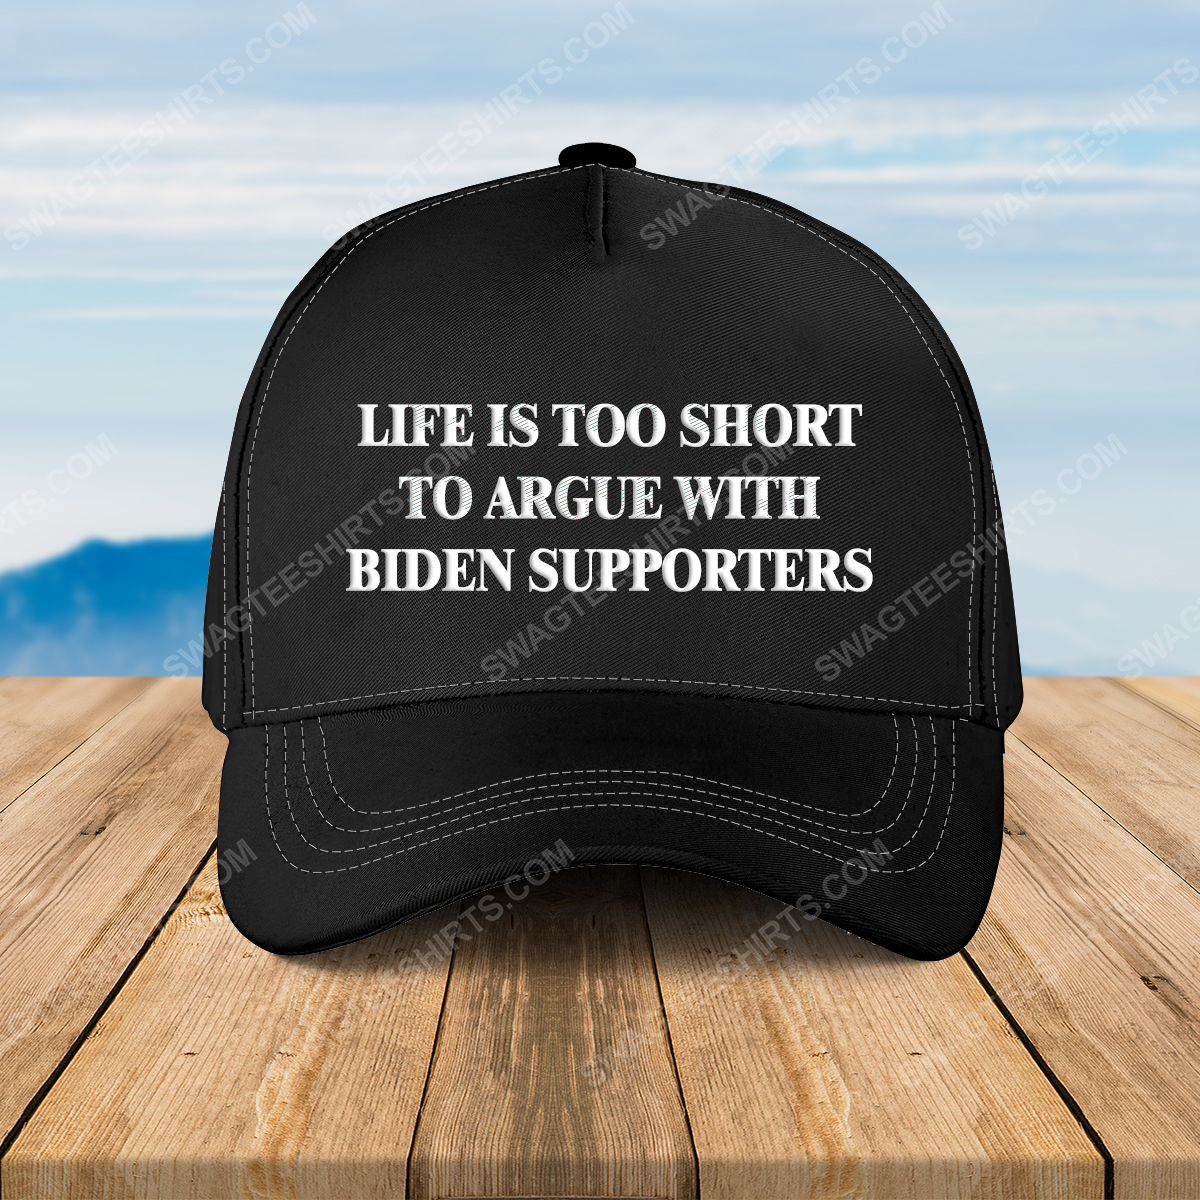 Life is too short to argue with biden supporters full print classic hat 1